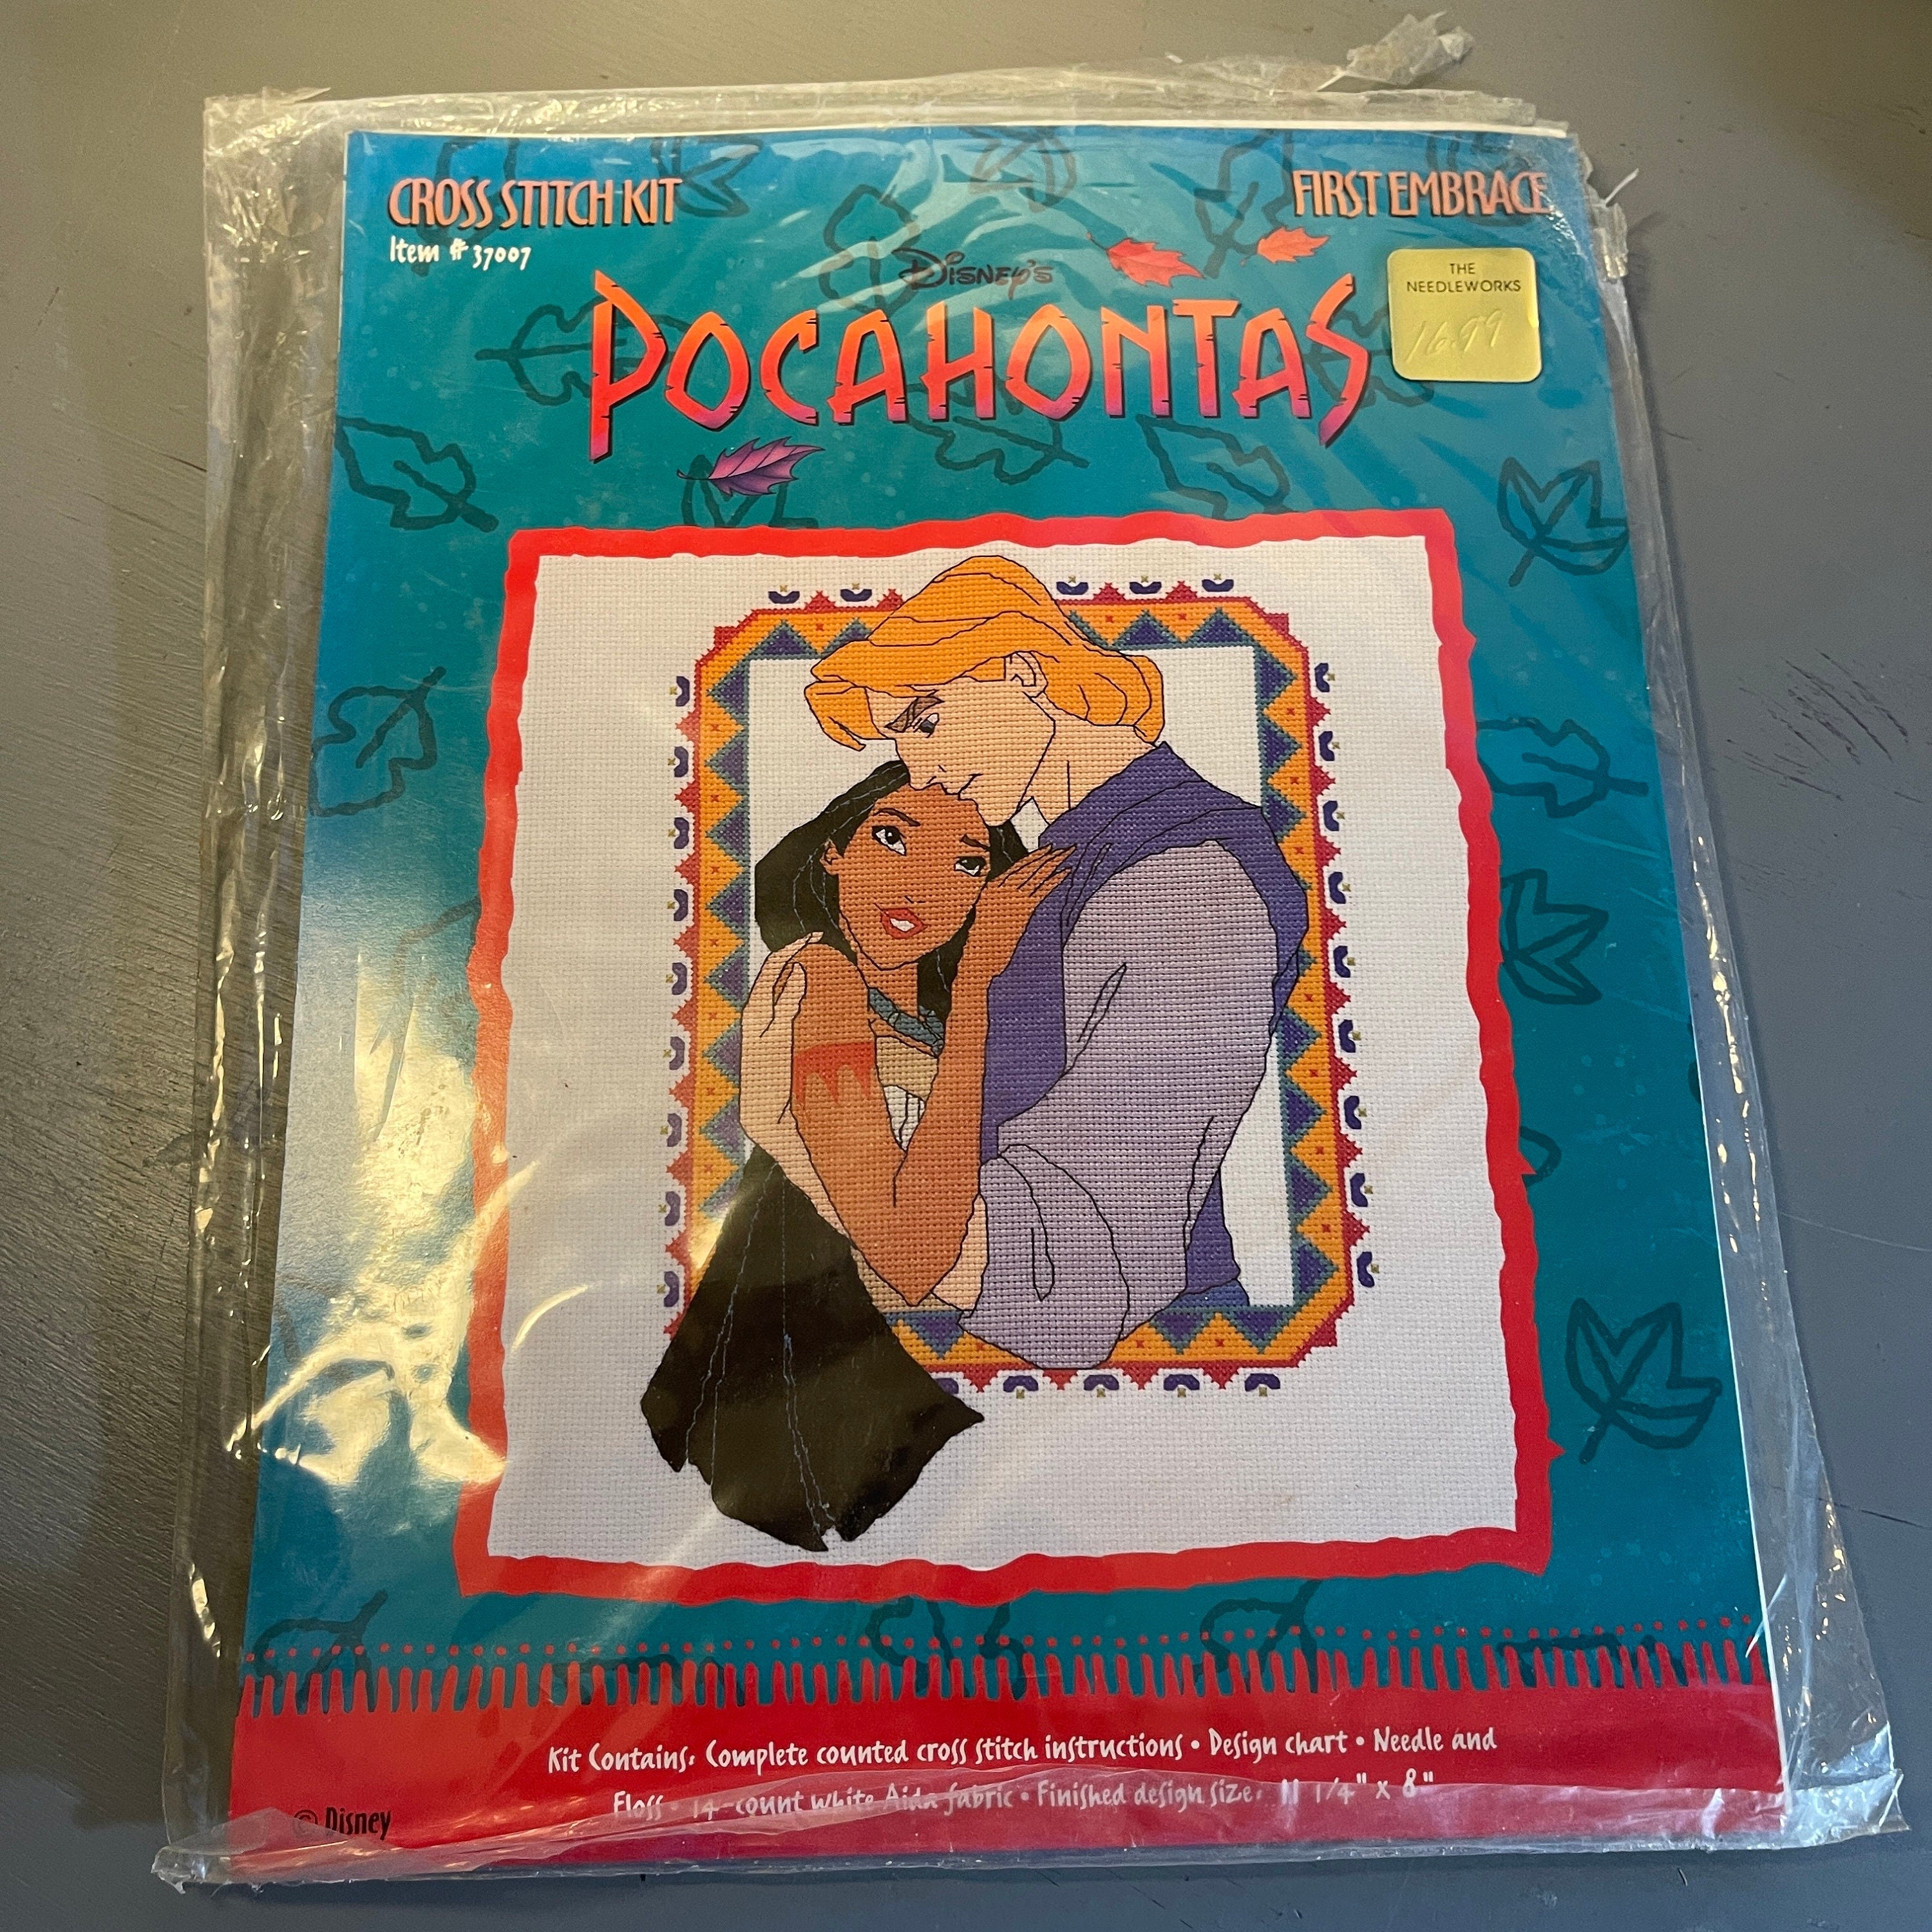 Disney's Pocahontas First Embrace 37007 Counted Cross Stitch Kit, Stitched  On 14 Count White AIDA